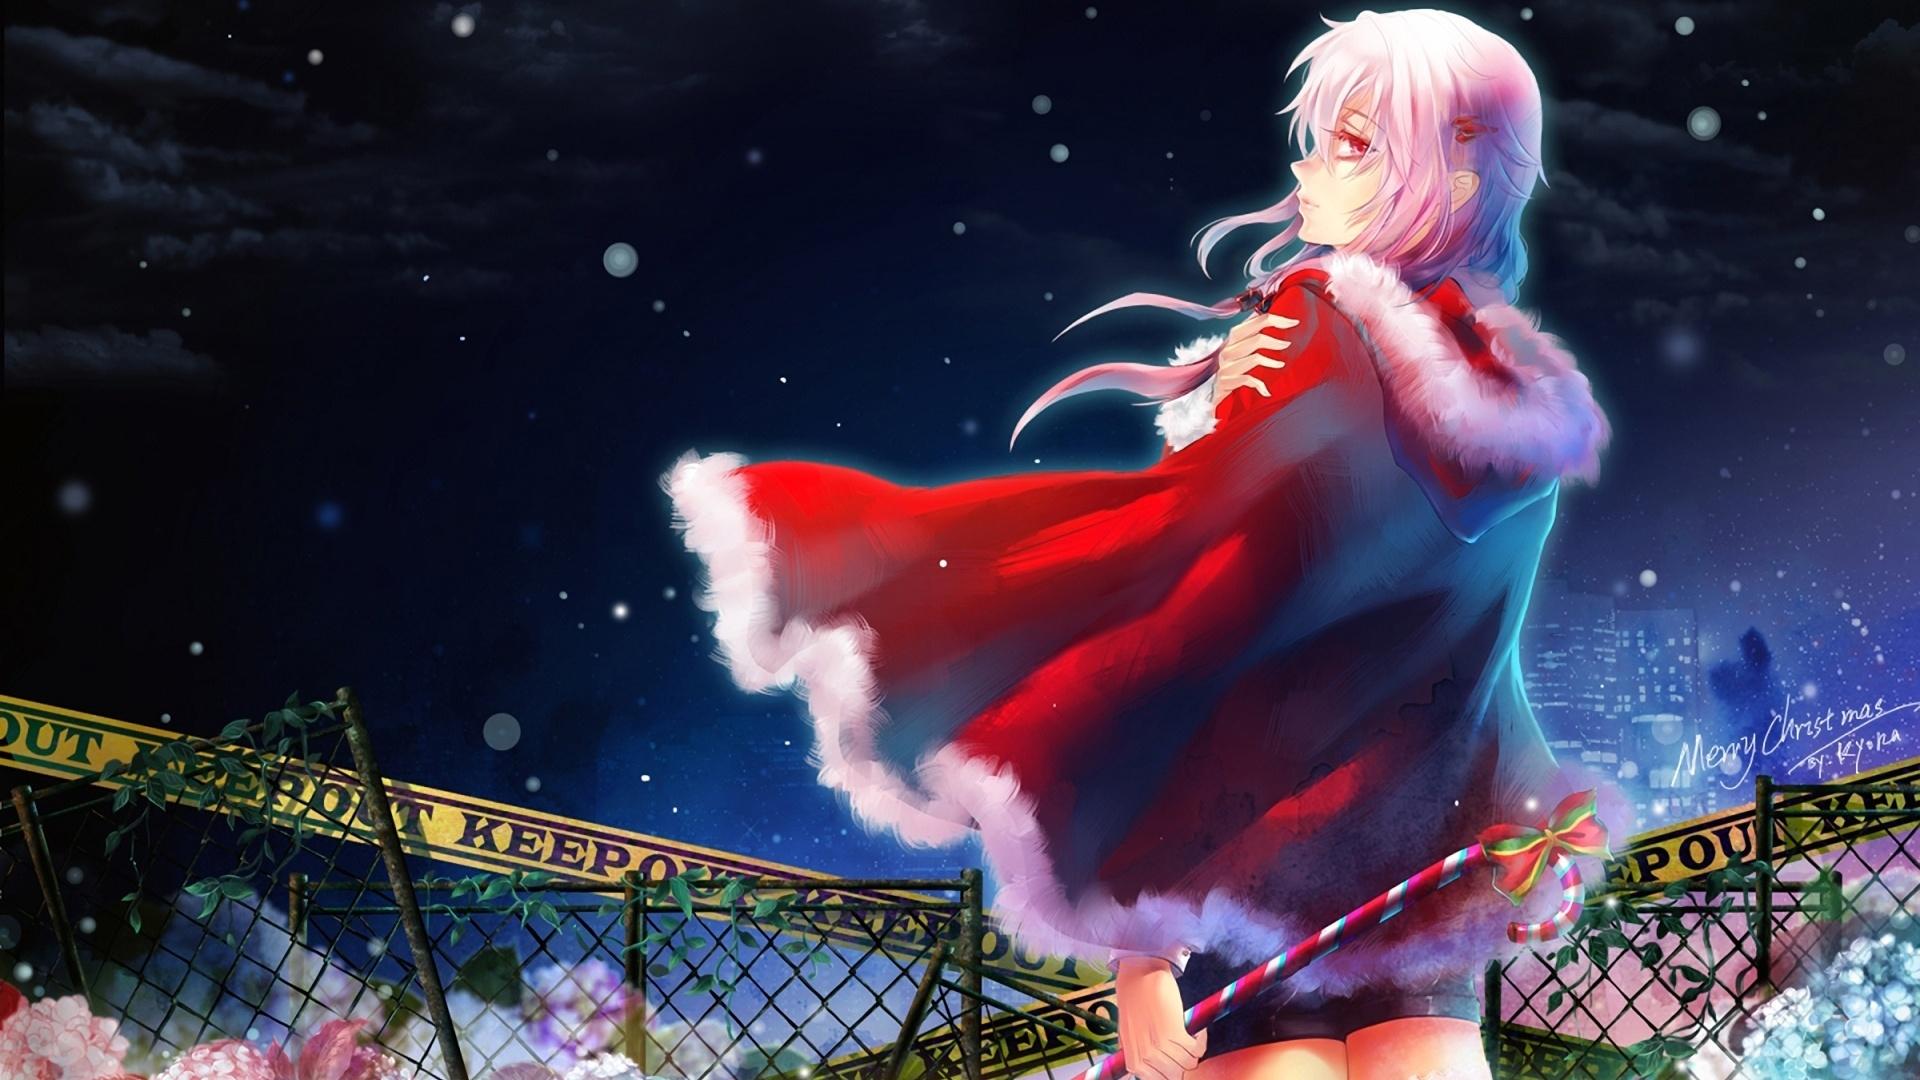 Anime Merry Christmas Wallpapers Wallpaper Cave